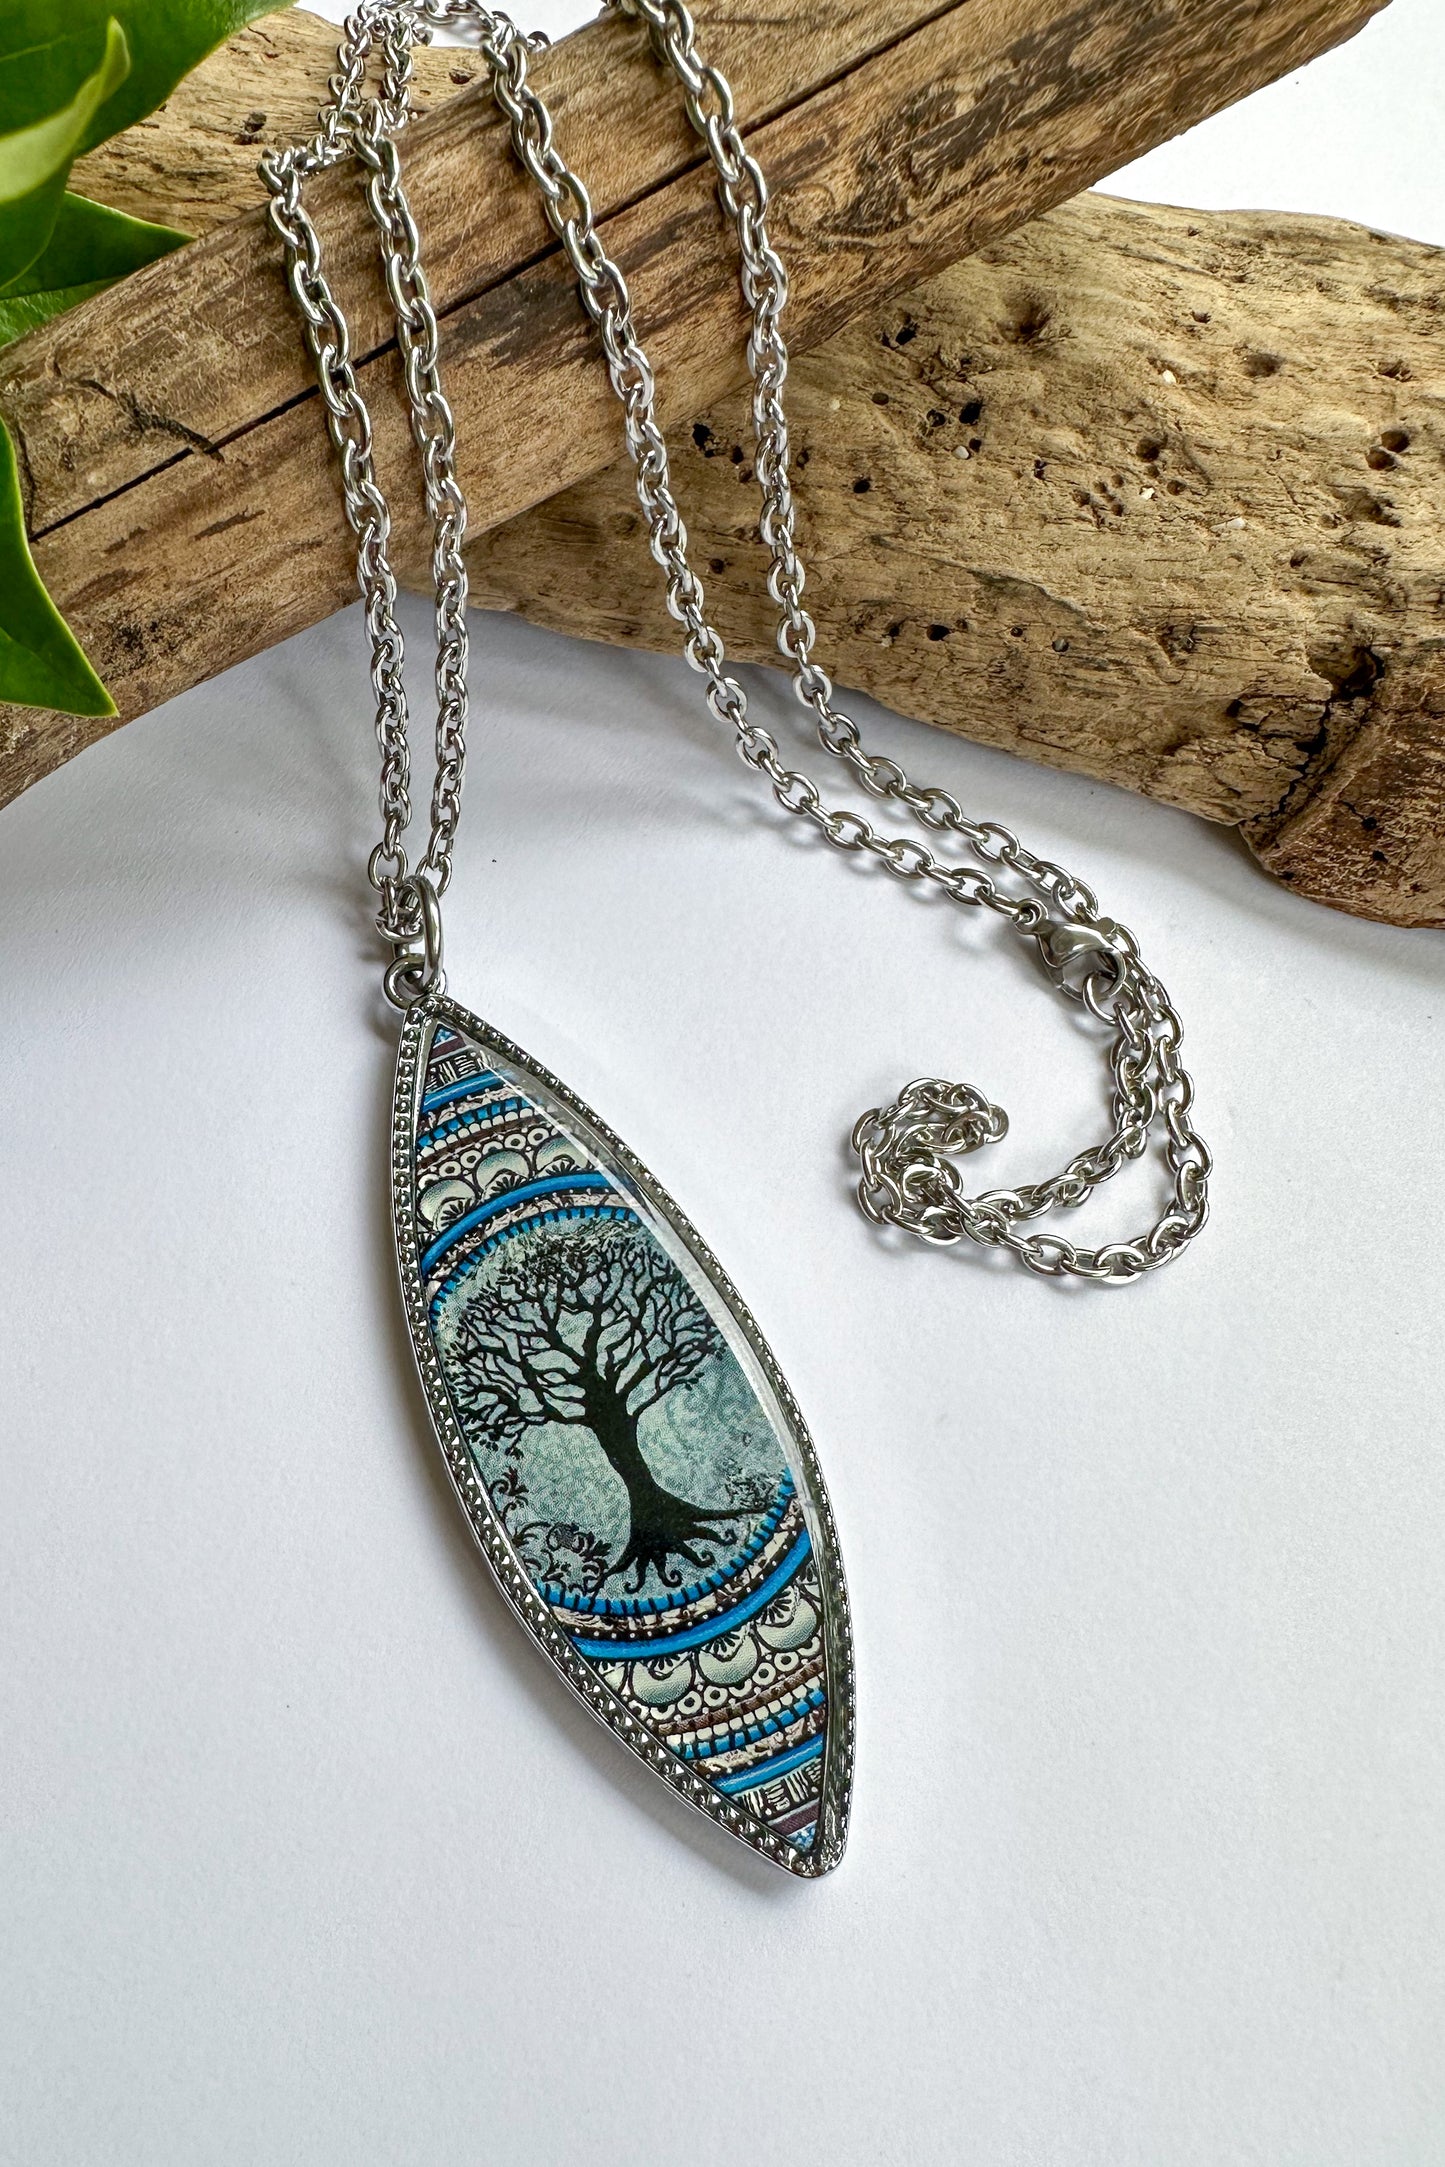 Load image into Gallery viewer, Tree Of Life Dark Blue Marquise Pendant Necklace - SpiritedBoutiques Boho Hippie Boutique Style Necklace, Spirit Lala
